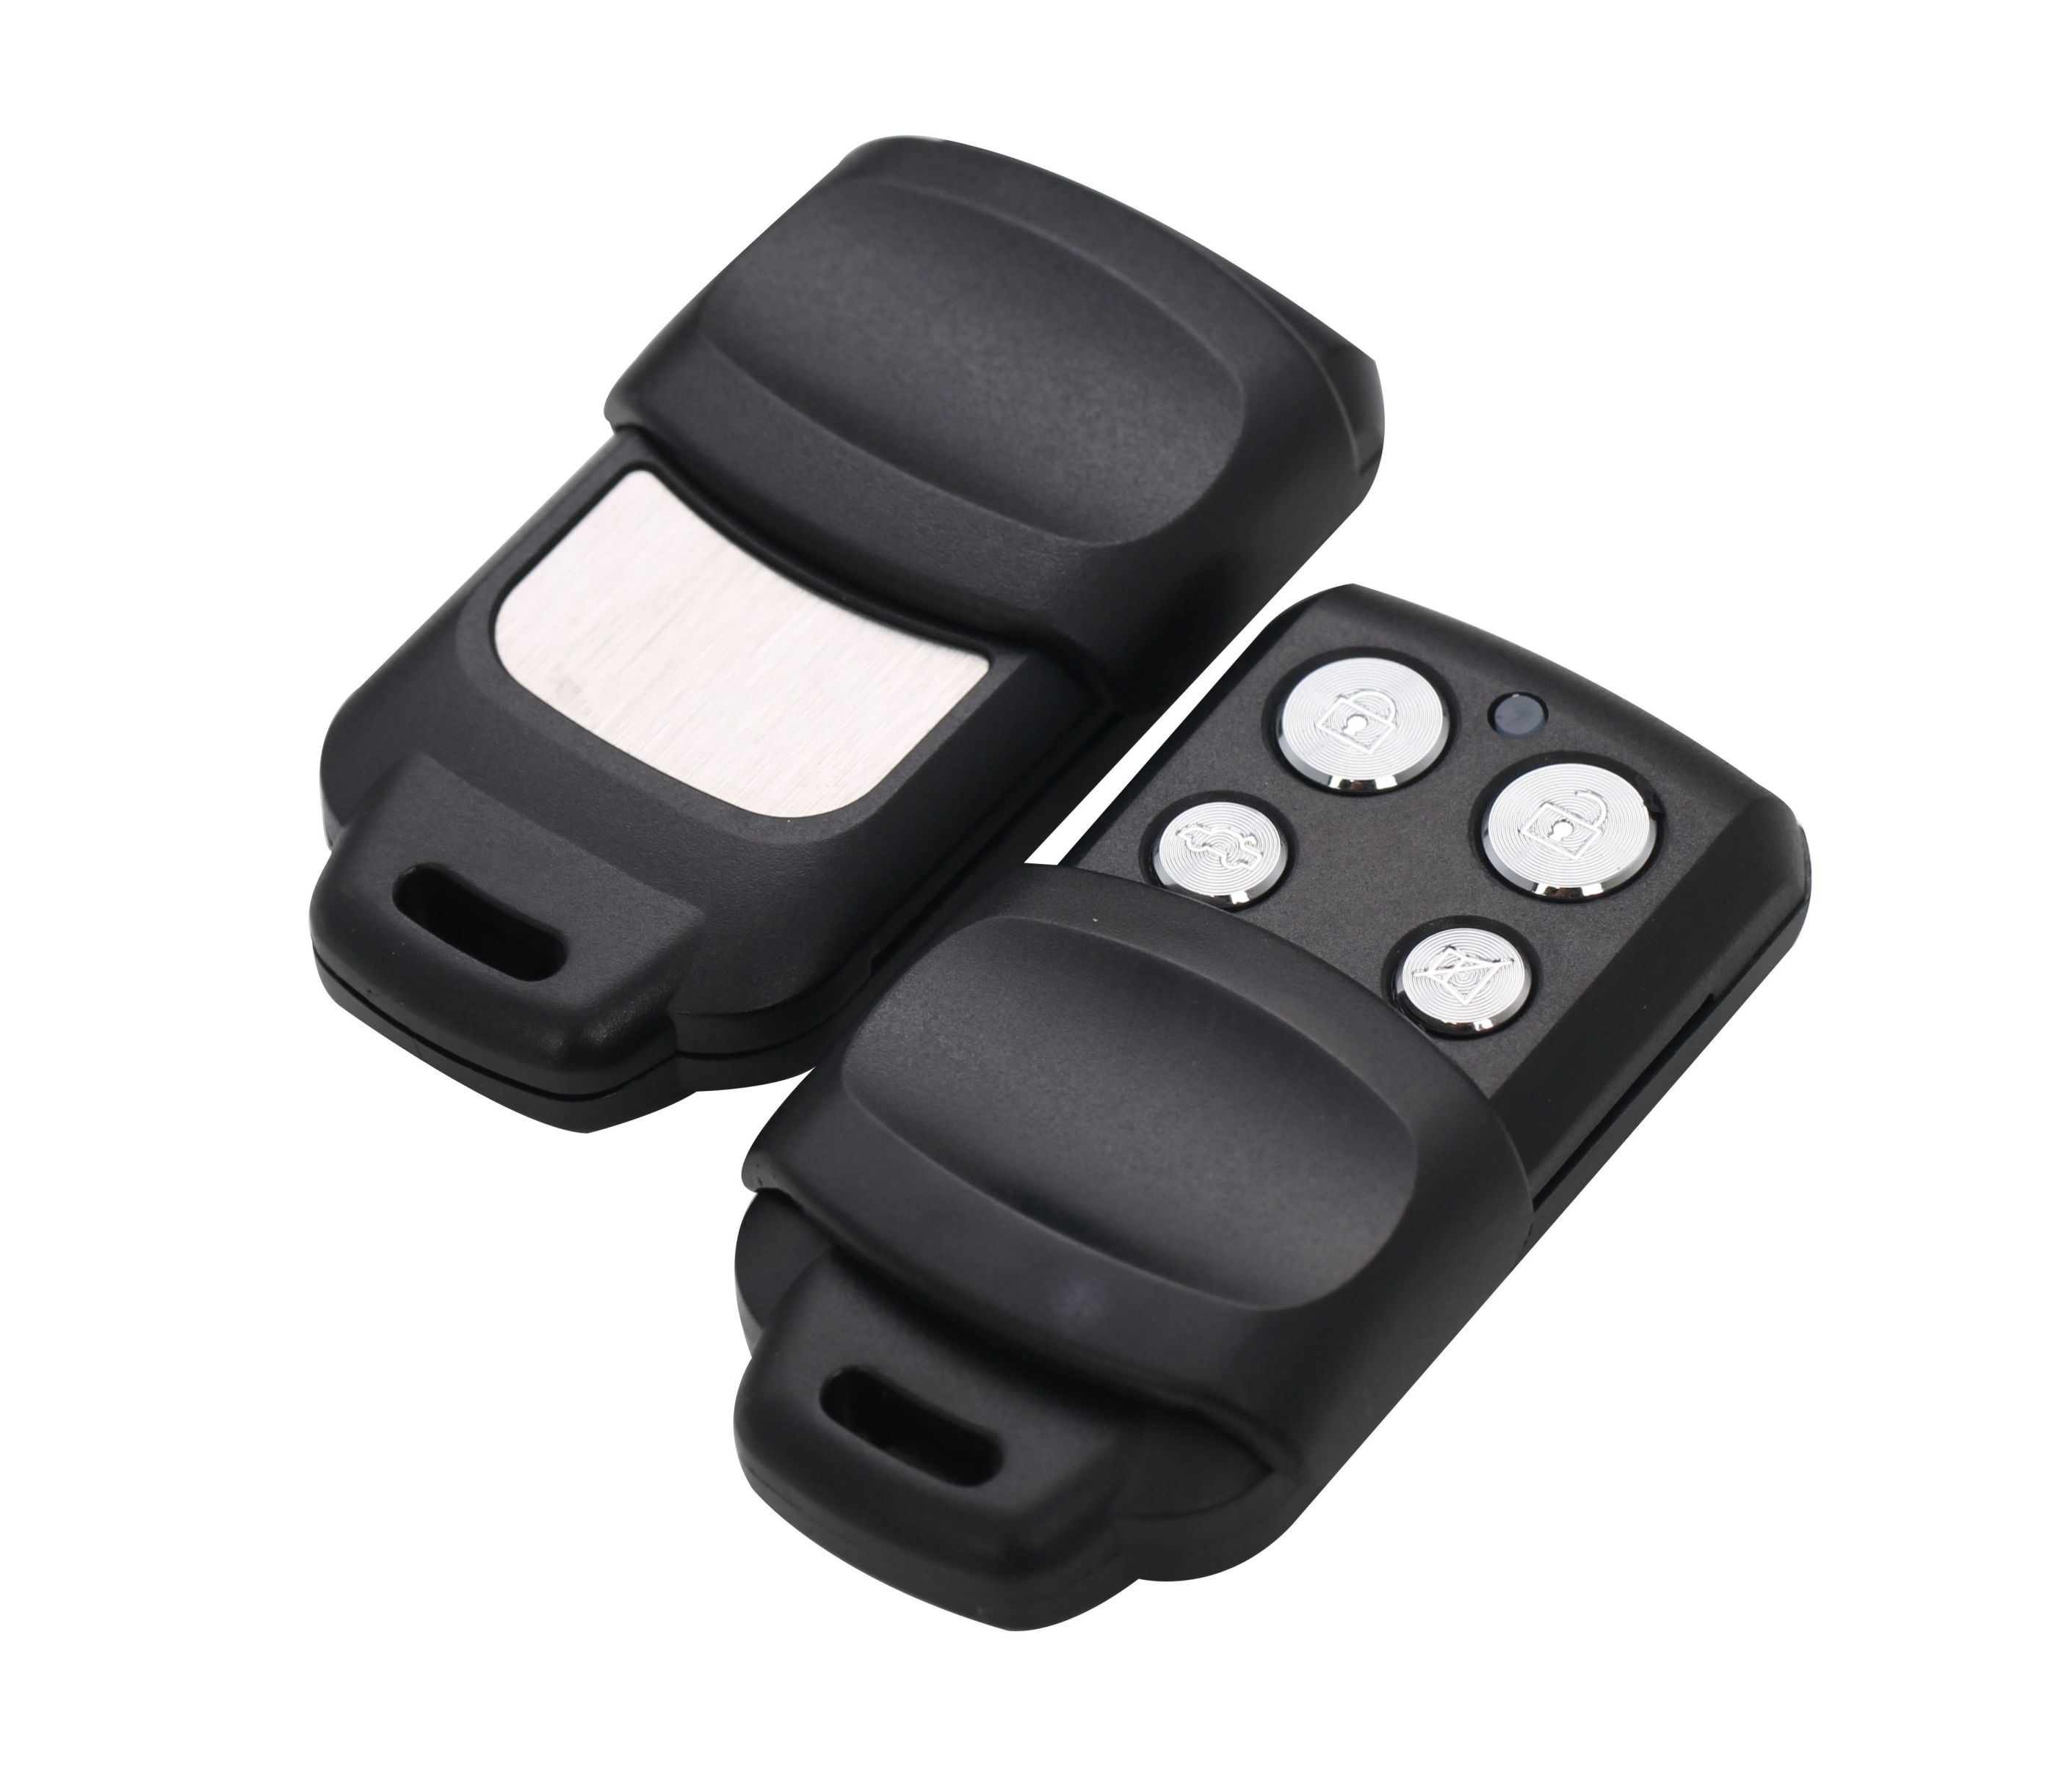 4 Buttons Remote Control Key